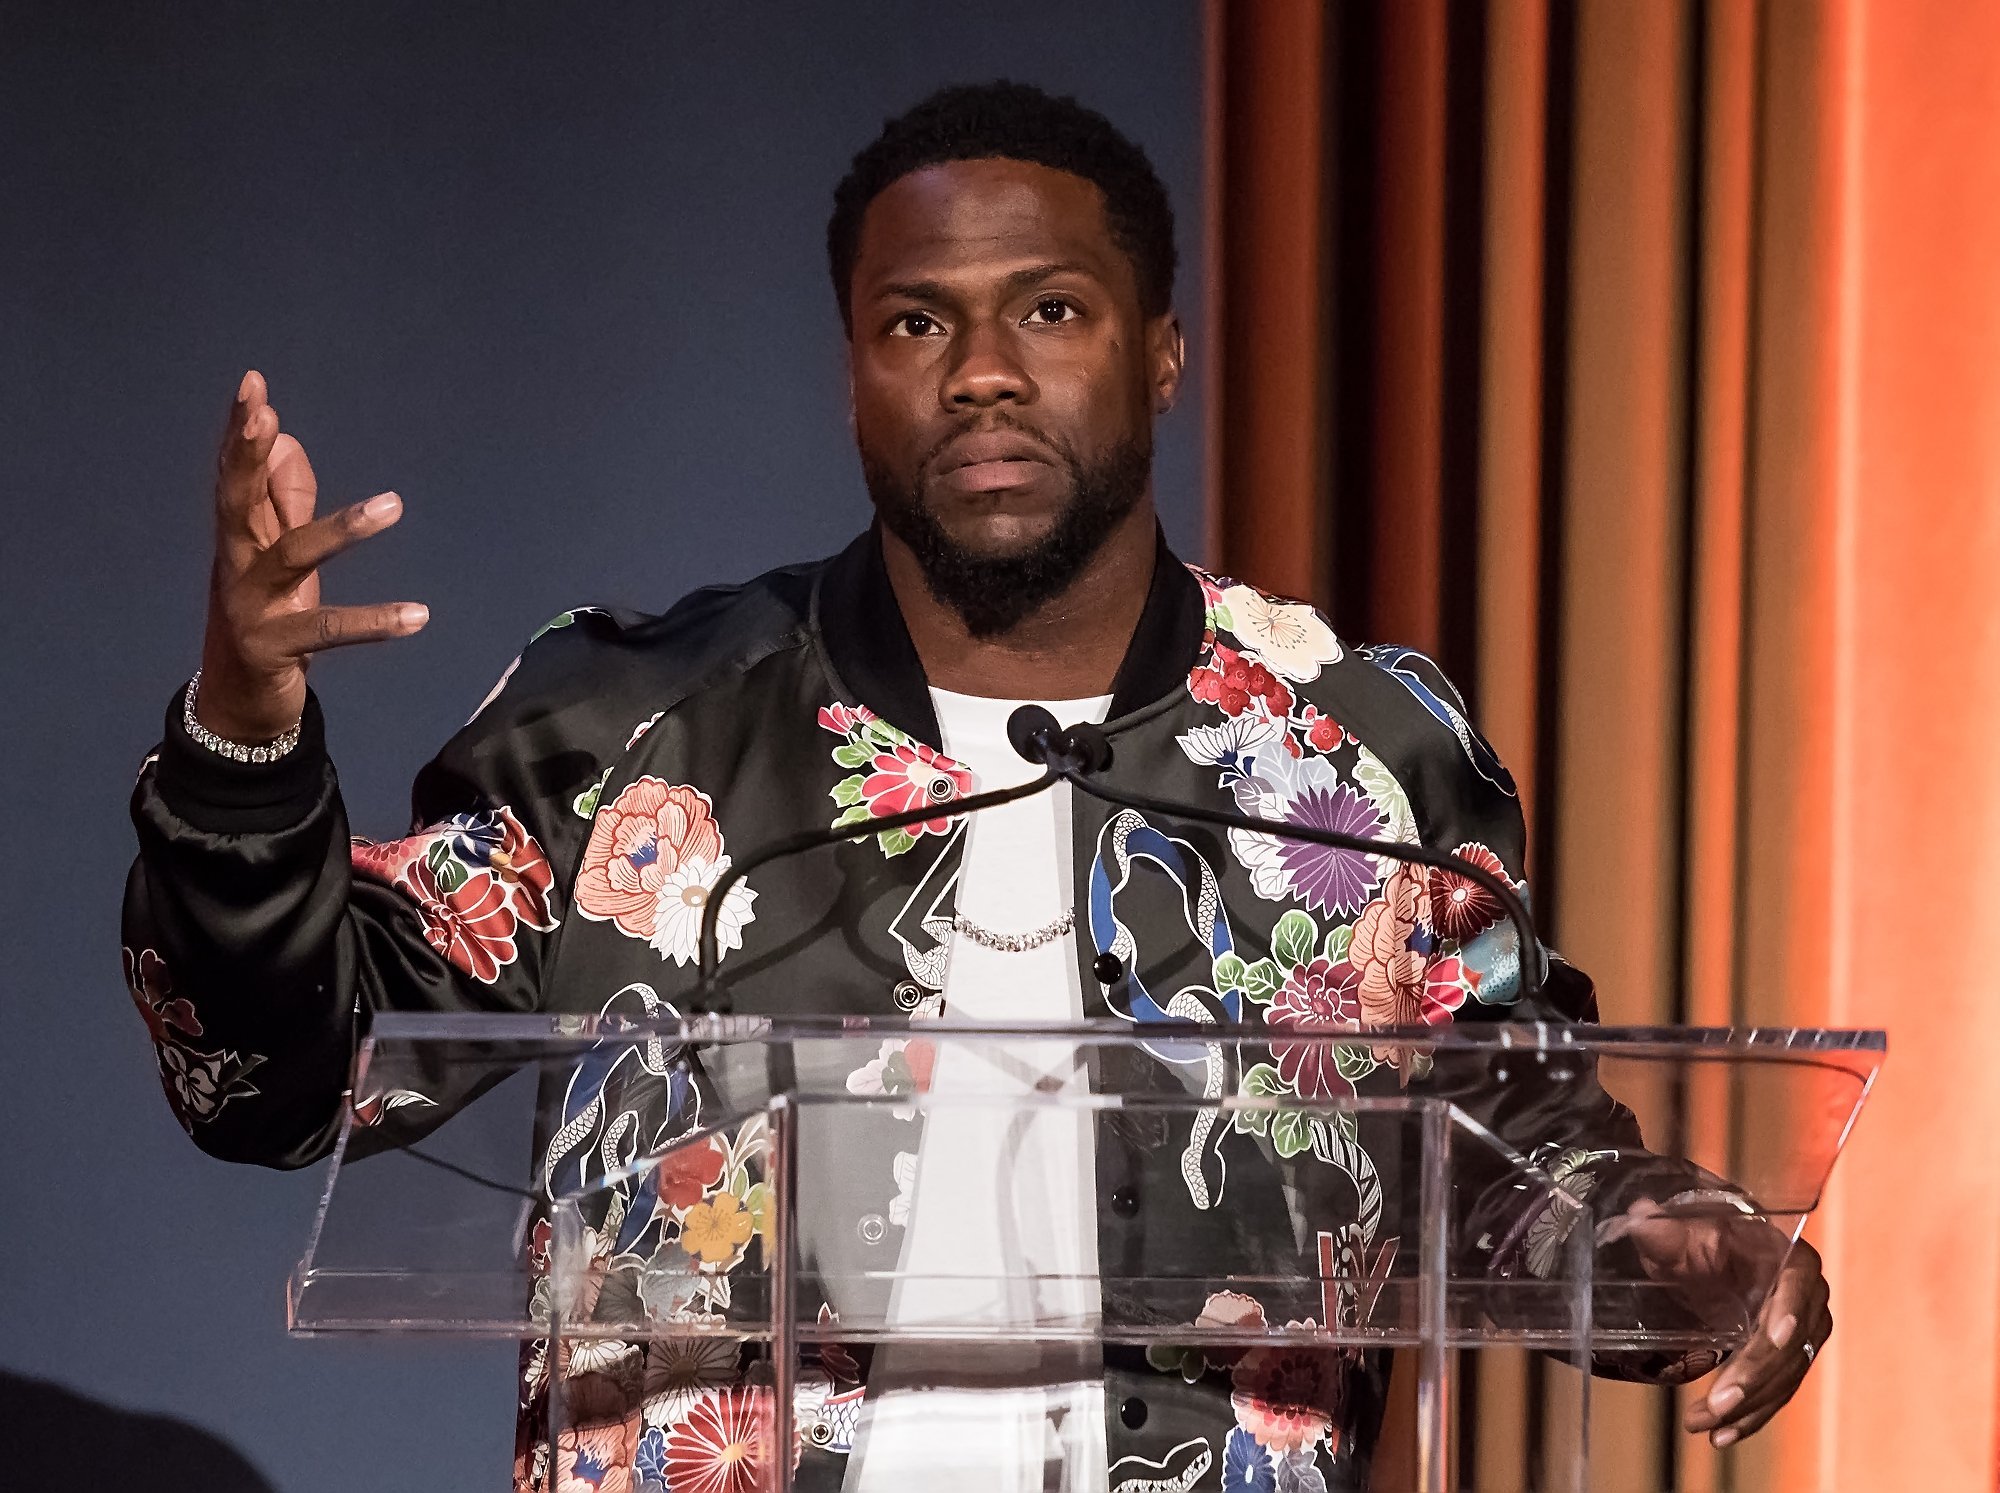 Kevin Hart at an awards show in Pennsylvania in May 2017. | Photo : Getty Images